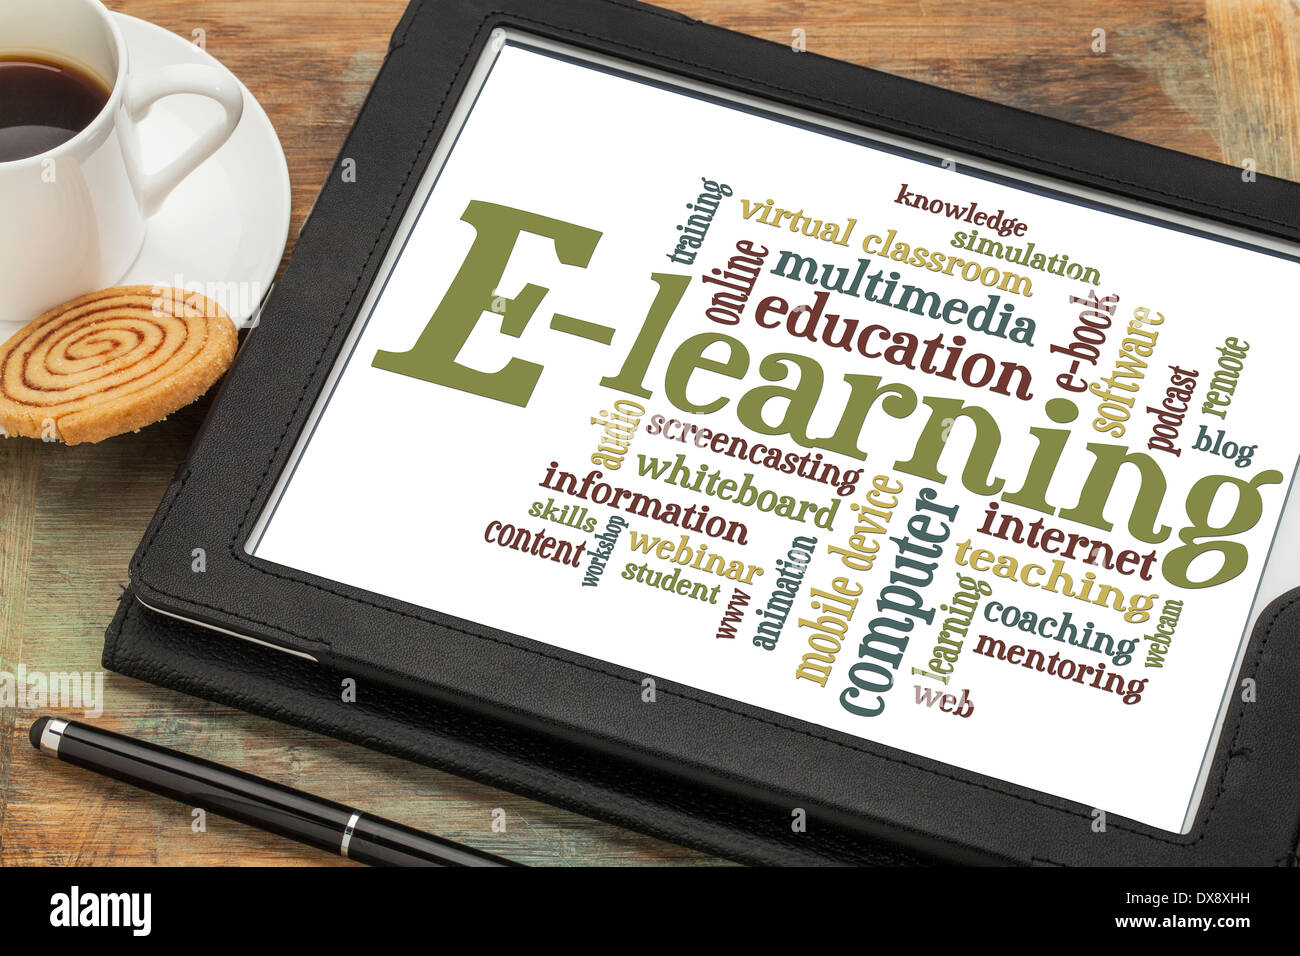 online education concept - e-learning word cloud on a digital tablet with a cup of coffee Stock Photo